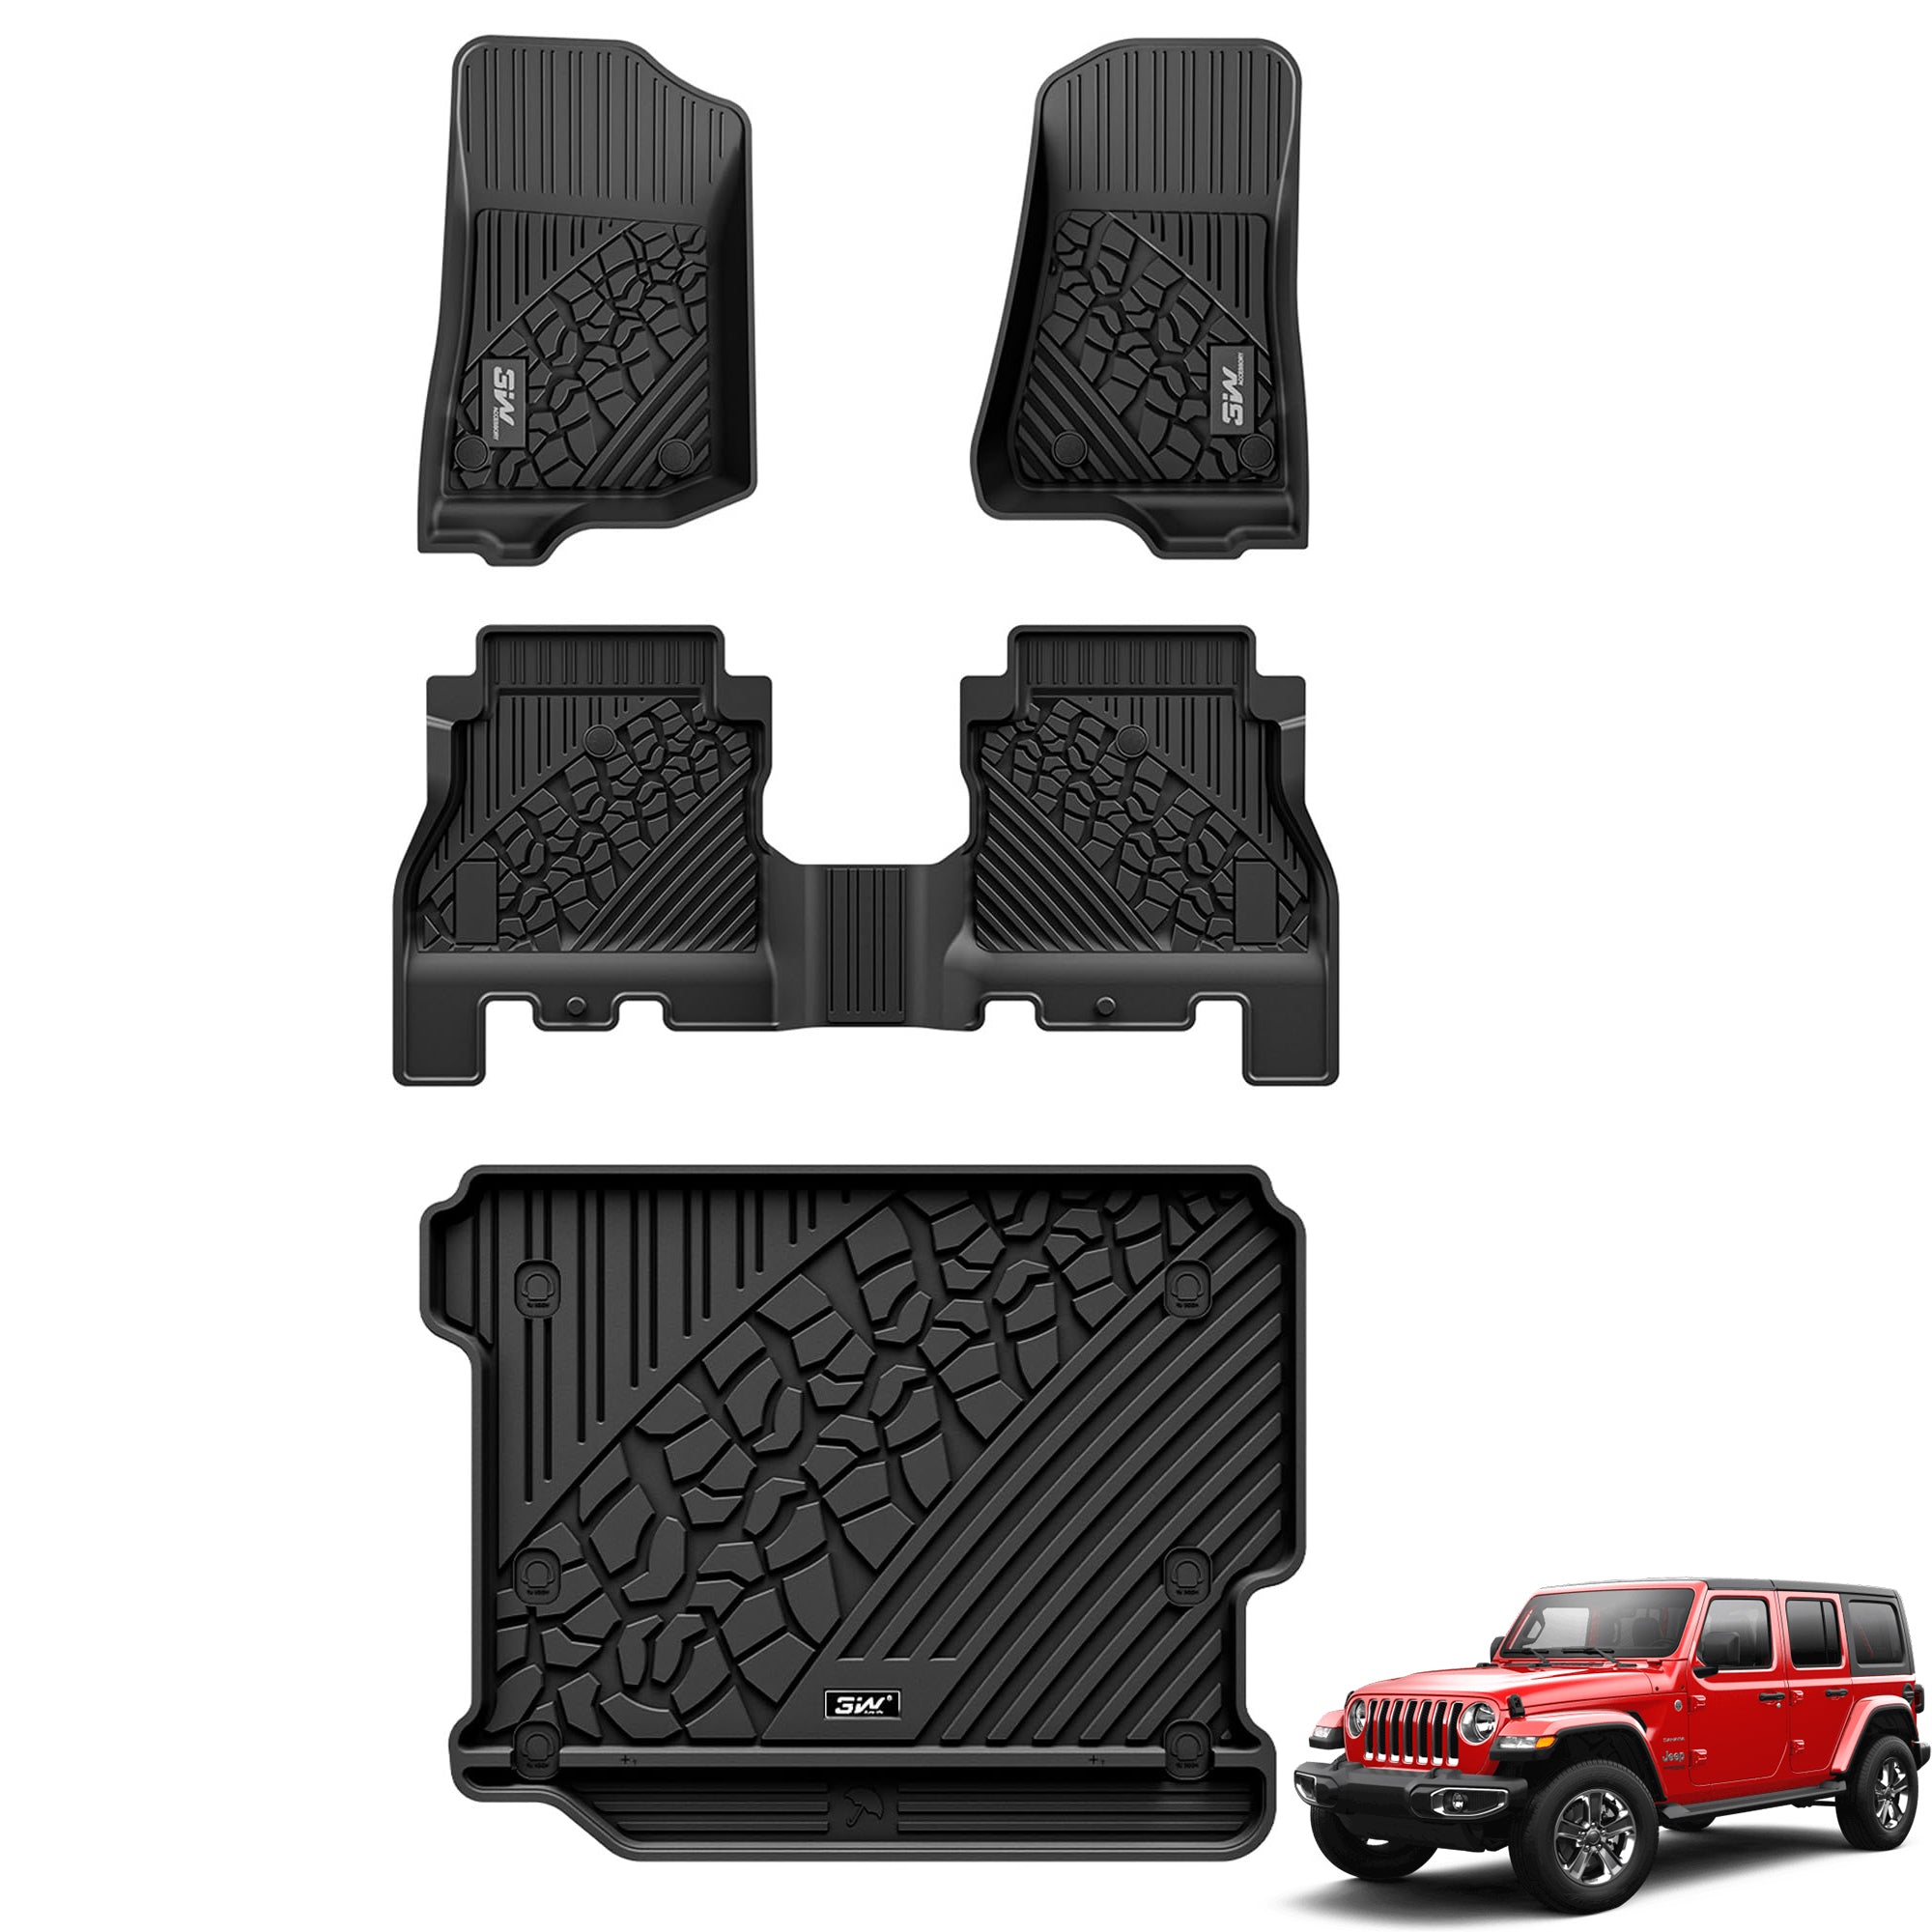 3W Jeep Wrangler JLU Custom Floor Mats or Trunk Mat 2018-2024 Unlimited 4-Door TPE Material & All-Weather Protection Vehicles & Parts 3Wliners 2018-2024 JL without Subwoofer 2018-2024 1st&2nd Row Mats+Trunk Mat